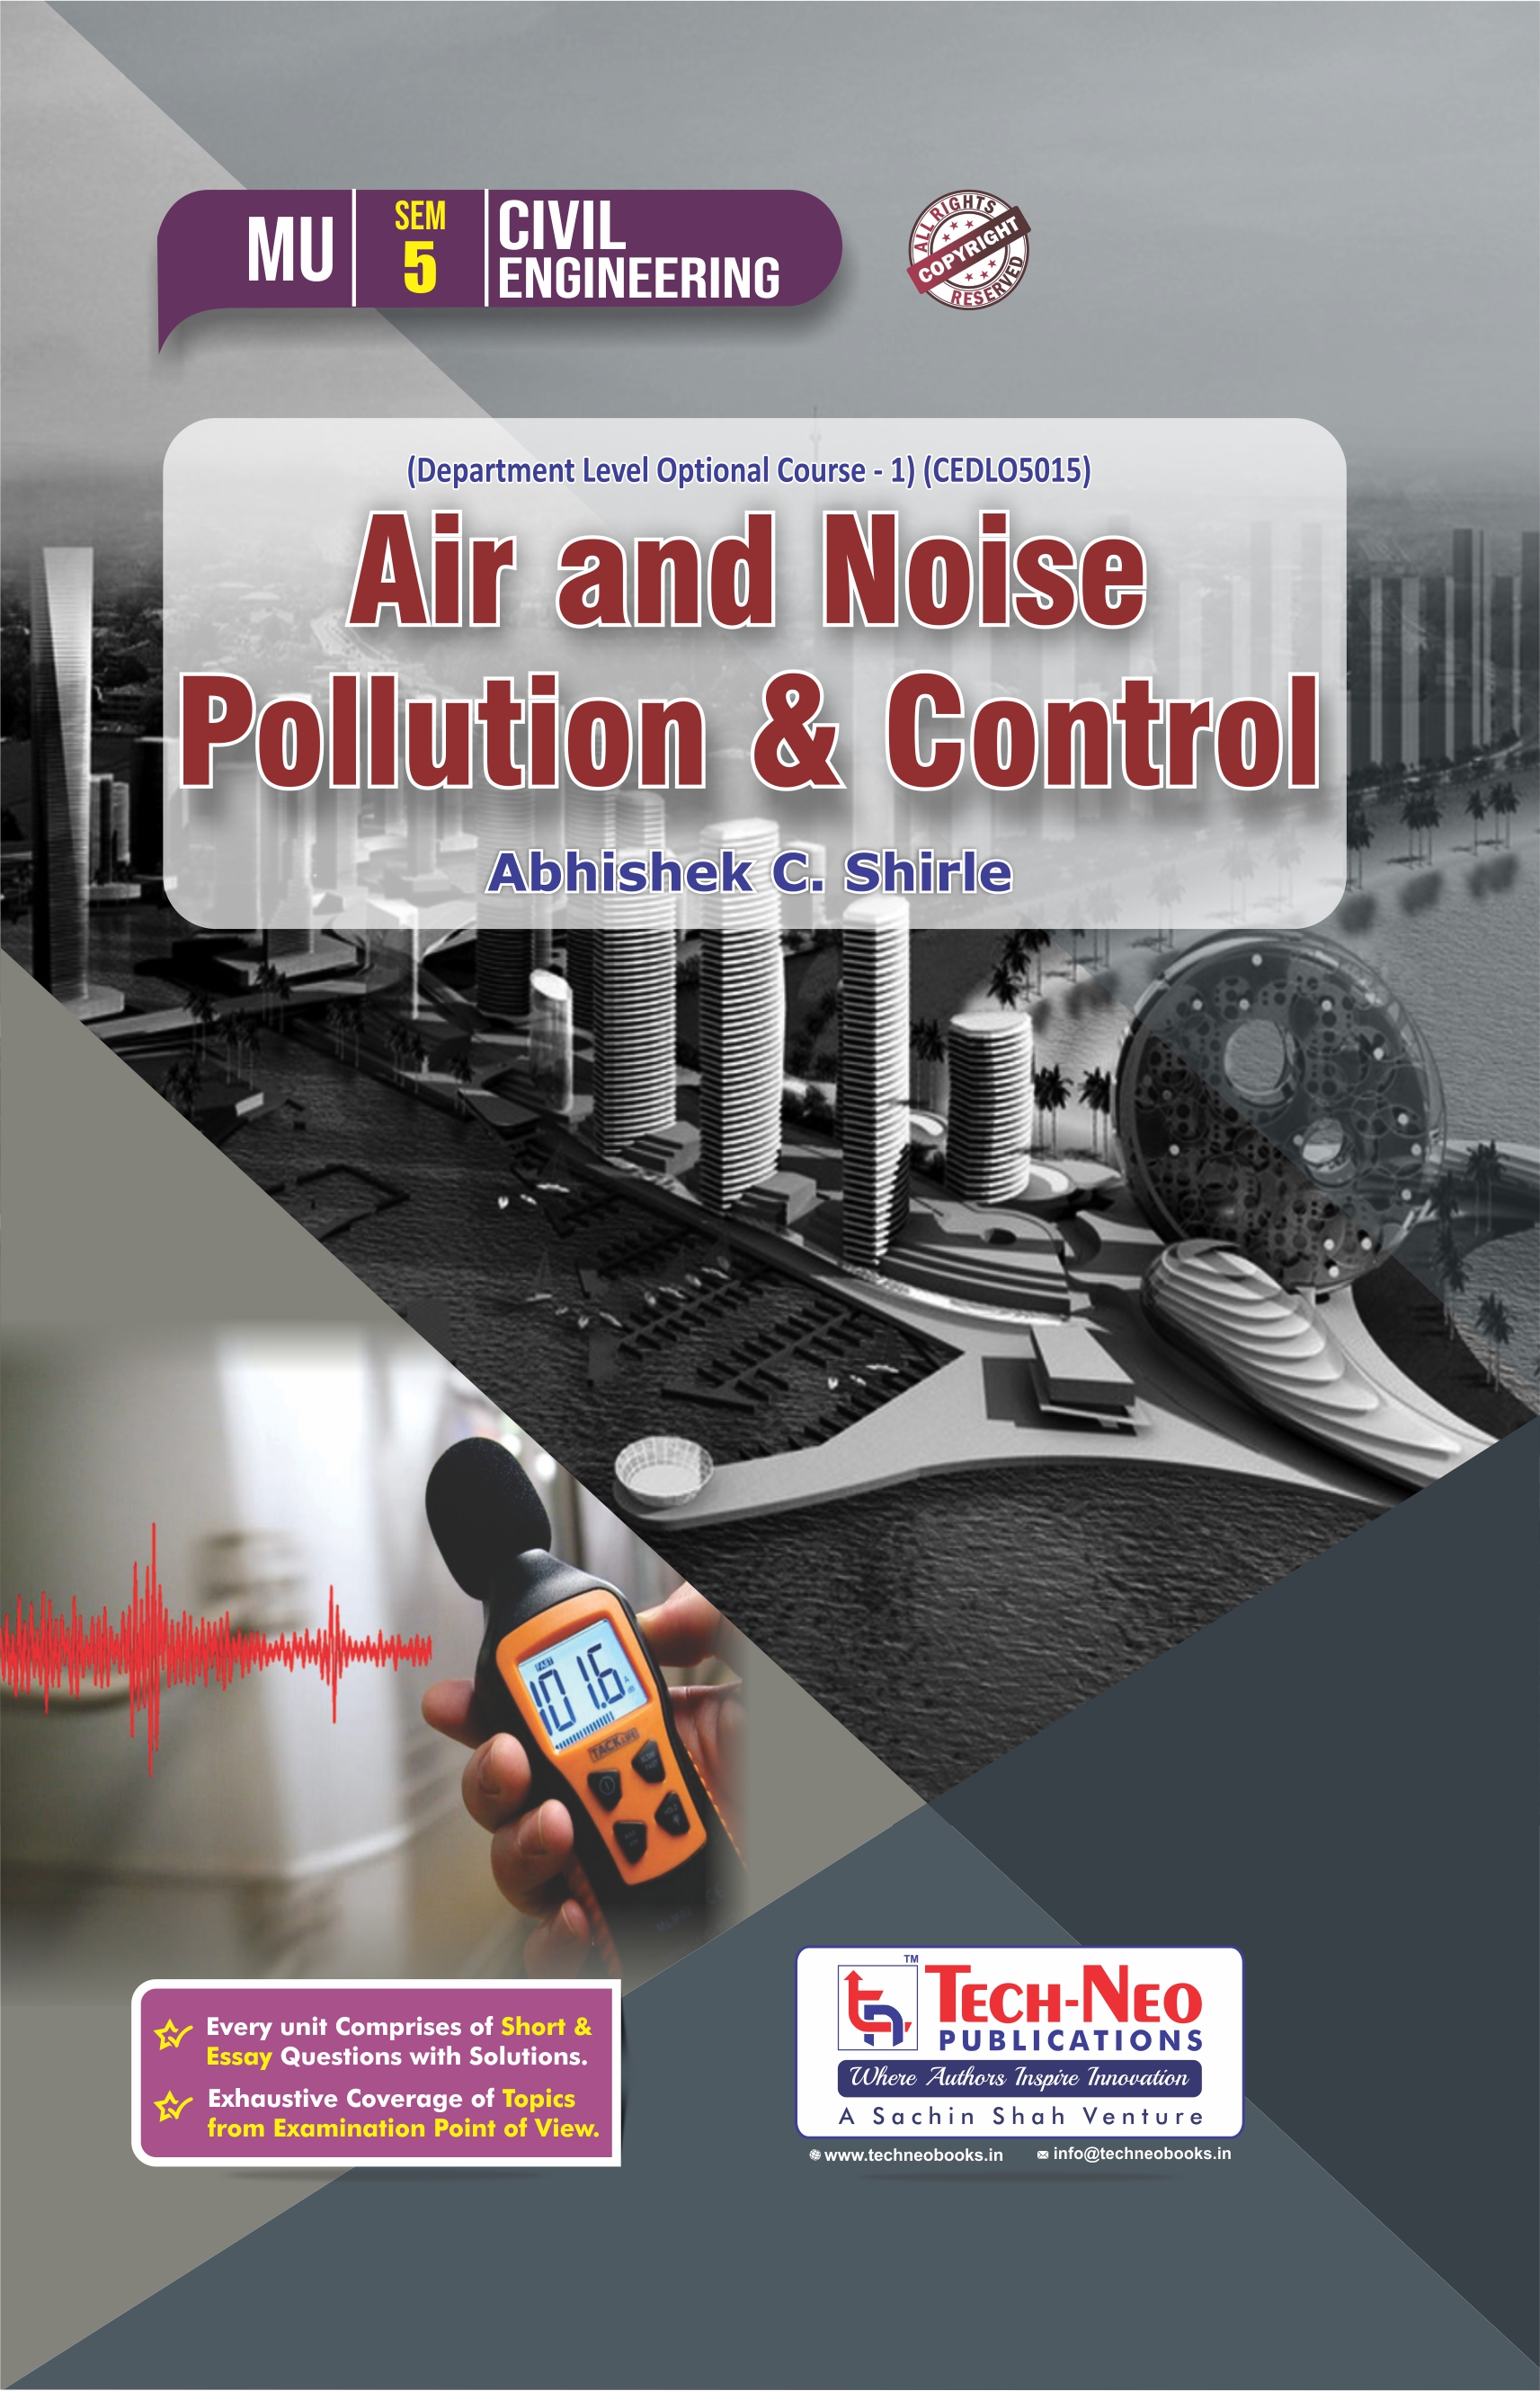 Air and Noise Pollution & Control